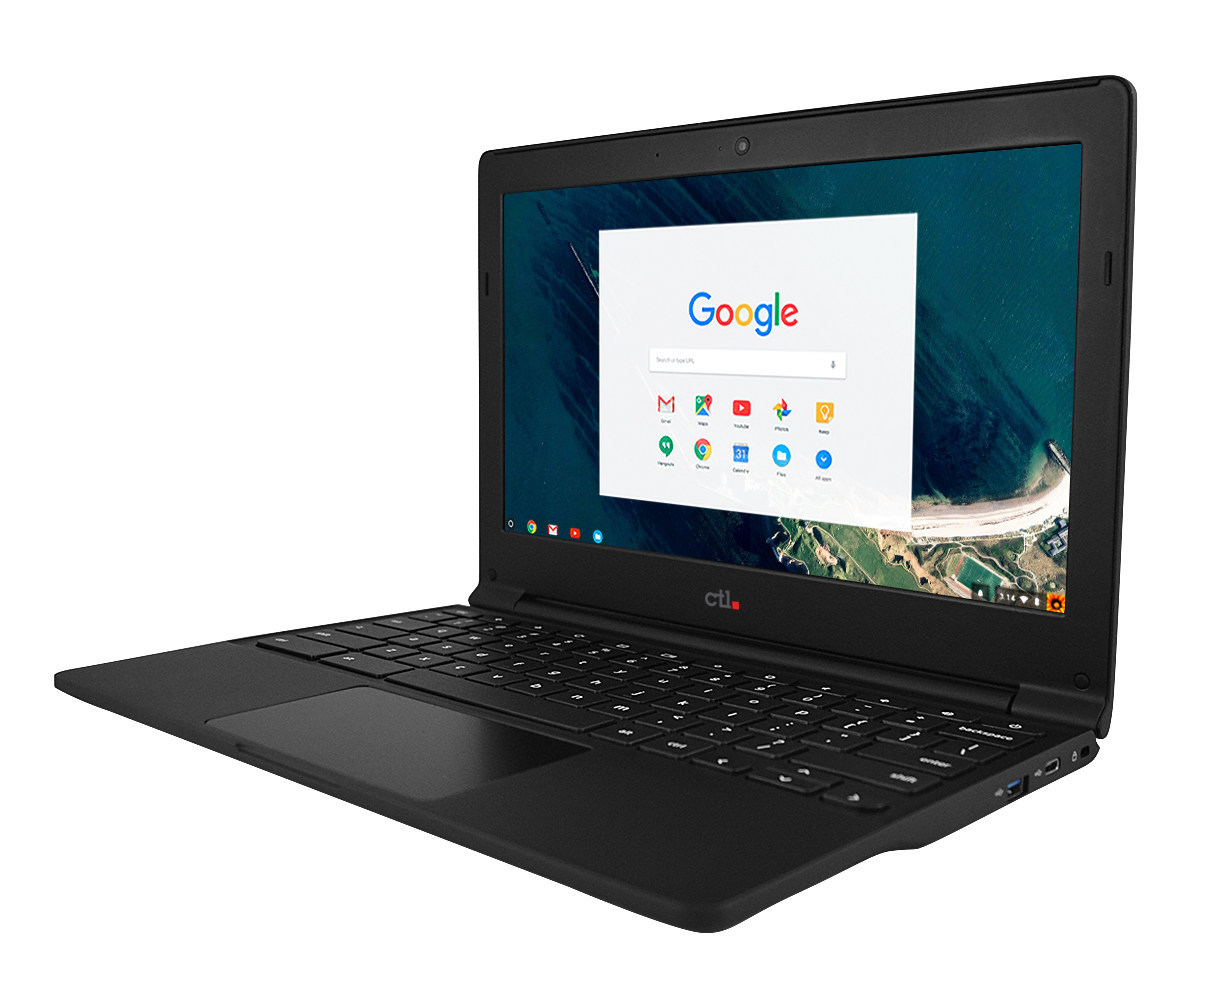 CTL Announces Its New Rugged Chromebook for Education with USB Type-C and Intel’s Latest Processors